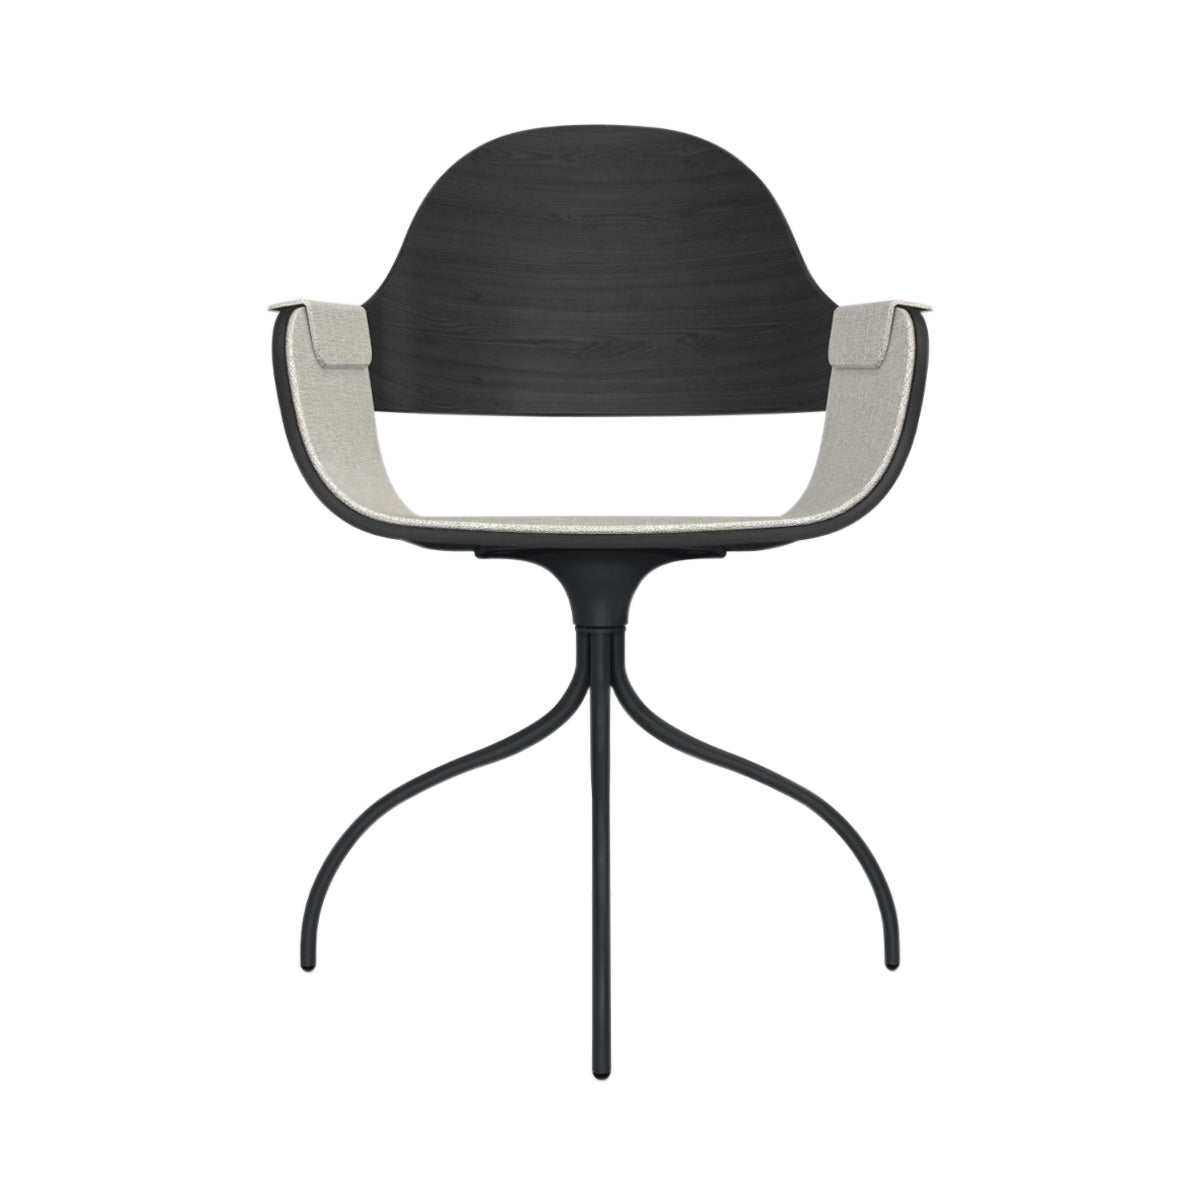 Showtime Nude Chair with Swivel Base: Interior Seat + Armrest Upholstered + Ash Stained Black + Anthracite Grey